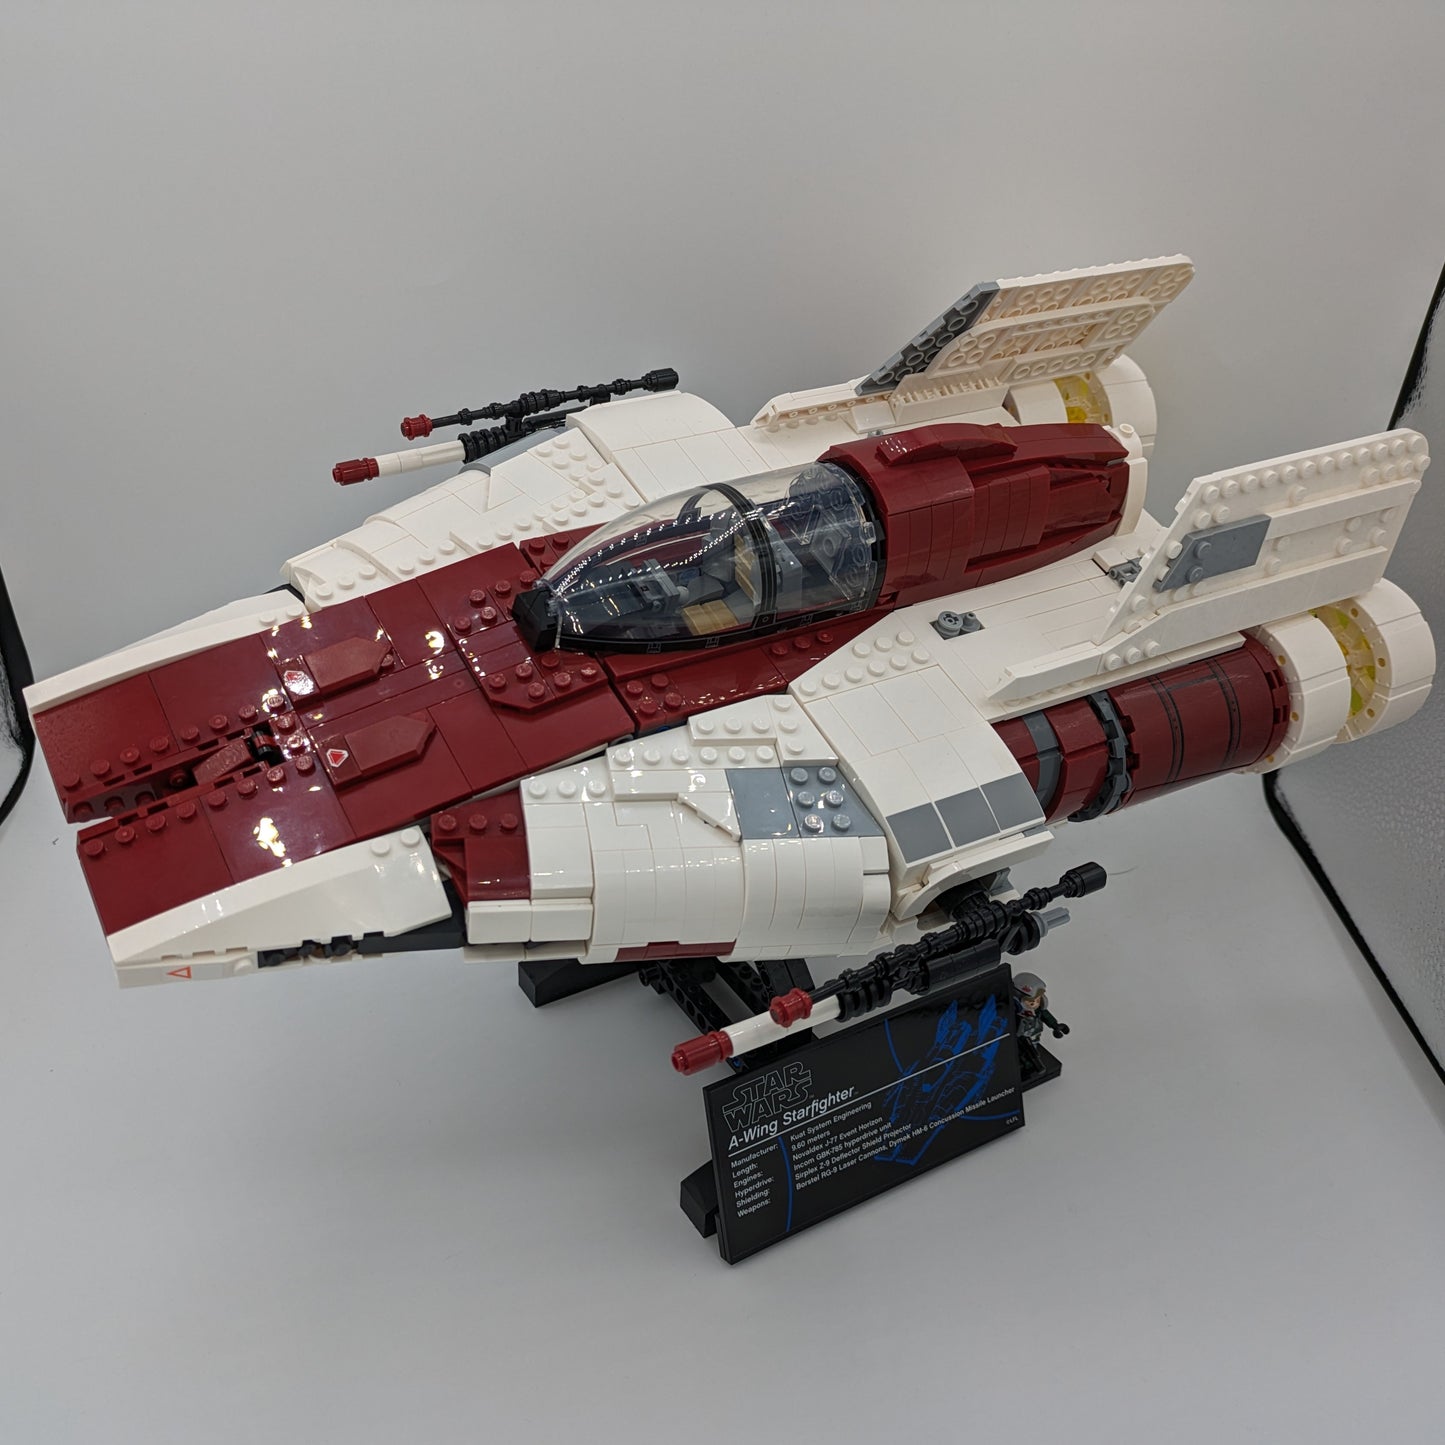 A-Wing Starfighter - UCS